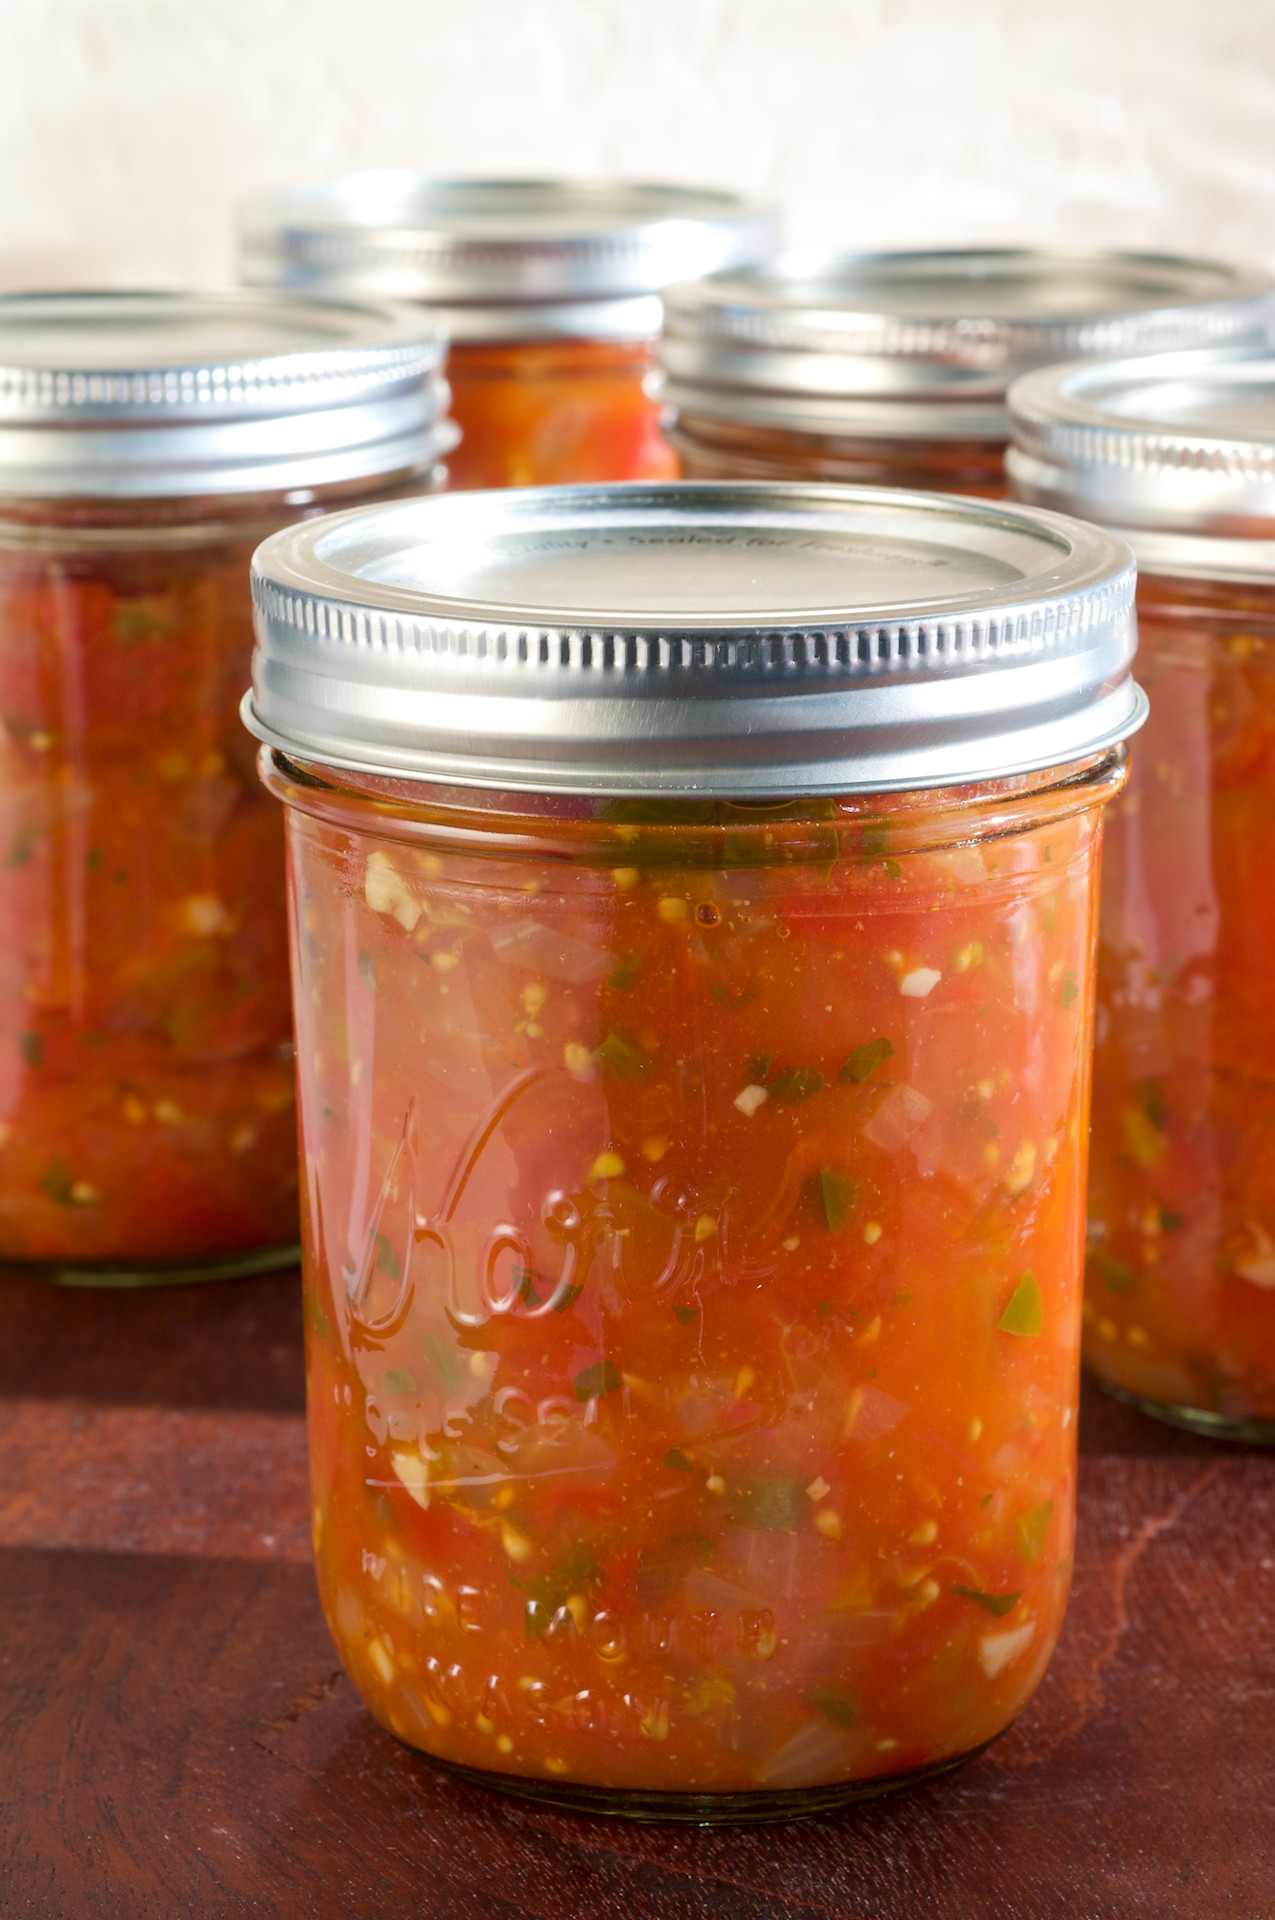 Homemade Salsa Recipe For Canning
 Canning Homemade Salsa in Recipes on The Food Channel